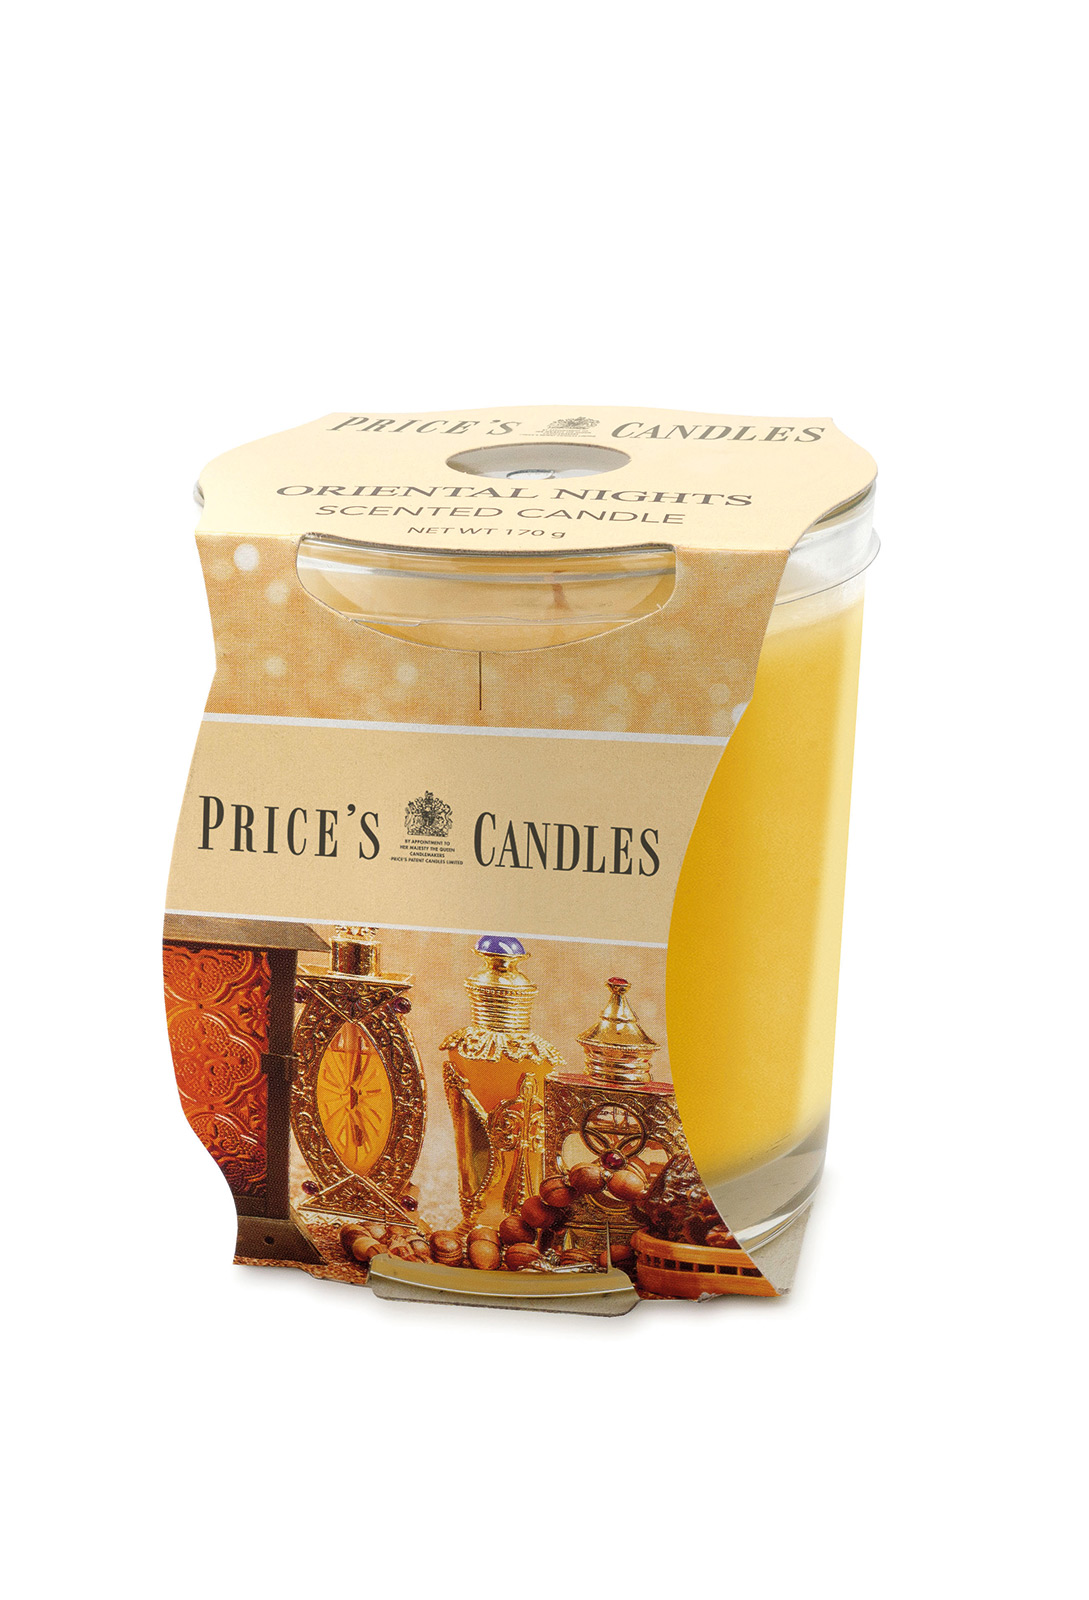 Prices Candle "Oriental Nights" 170g     